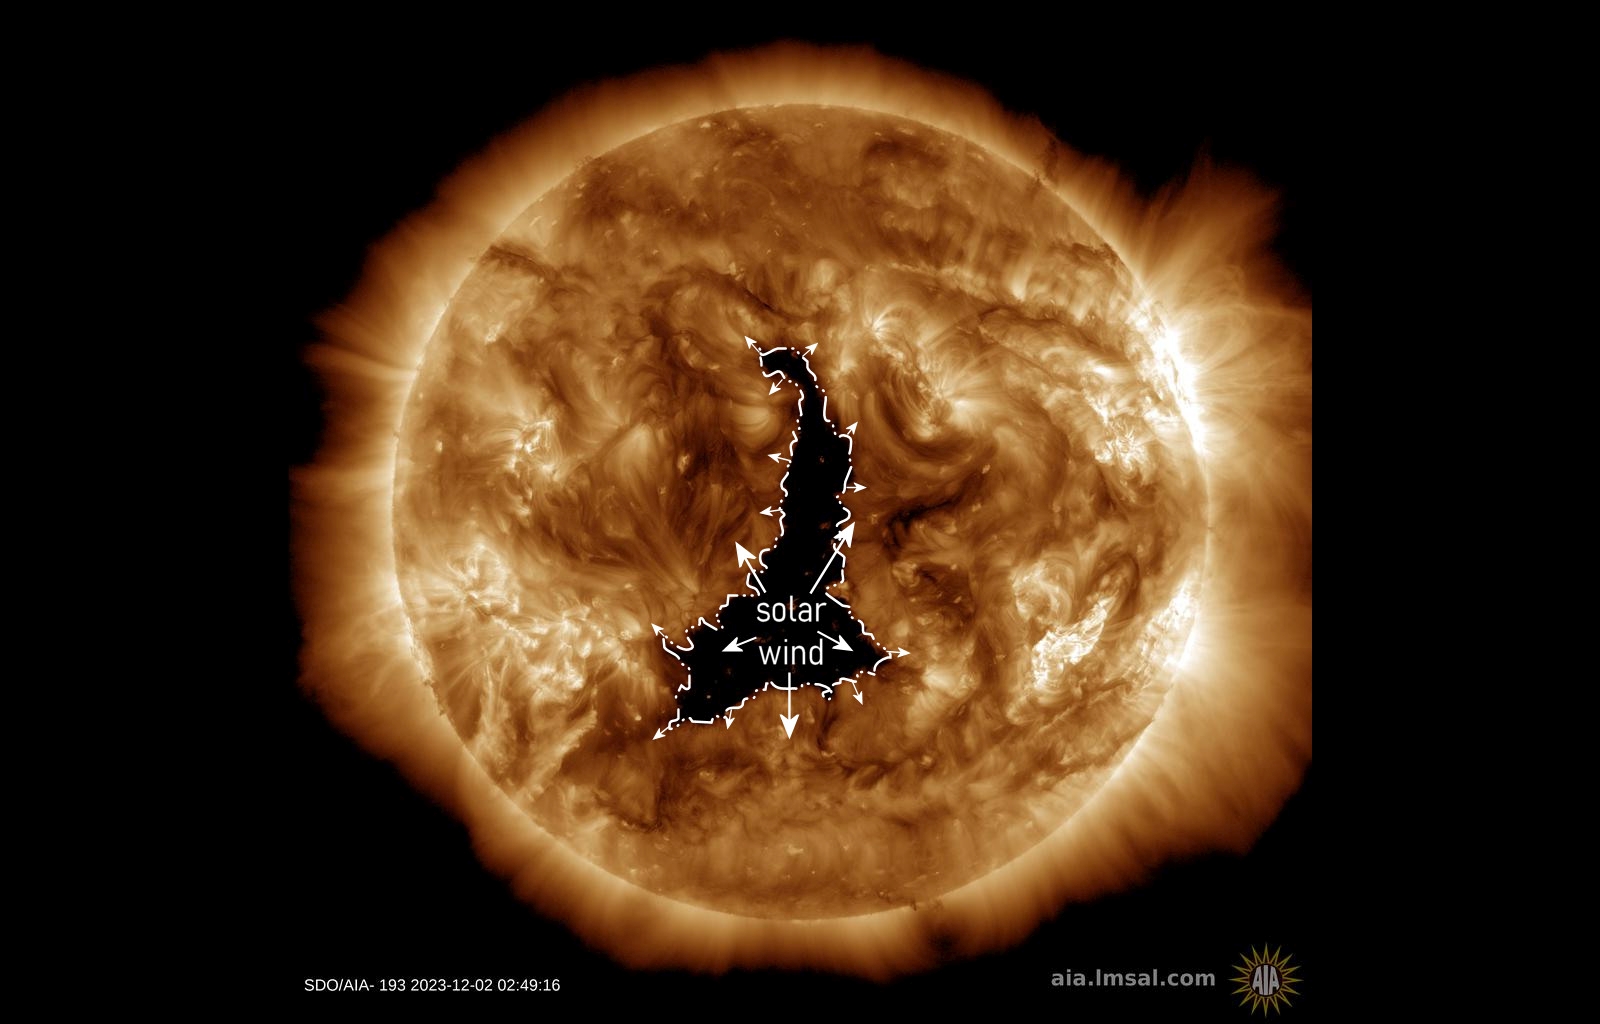 A huge “hole” in the sun threatens geomagnetic storms